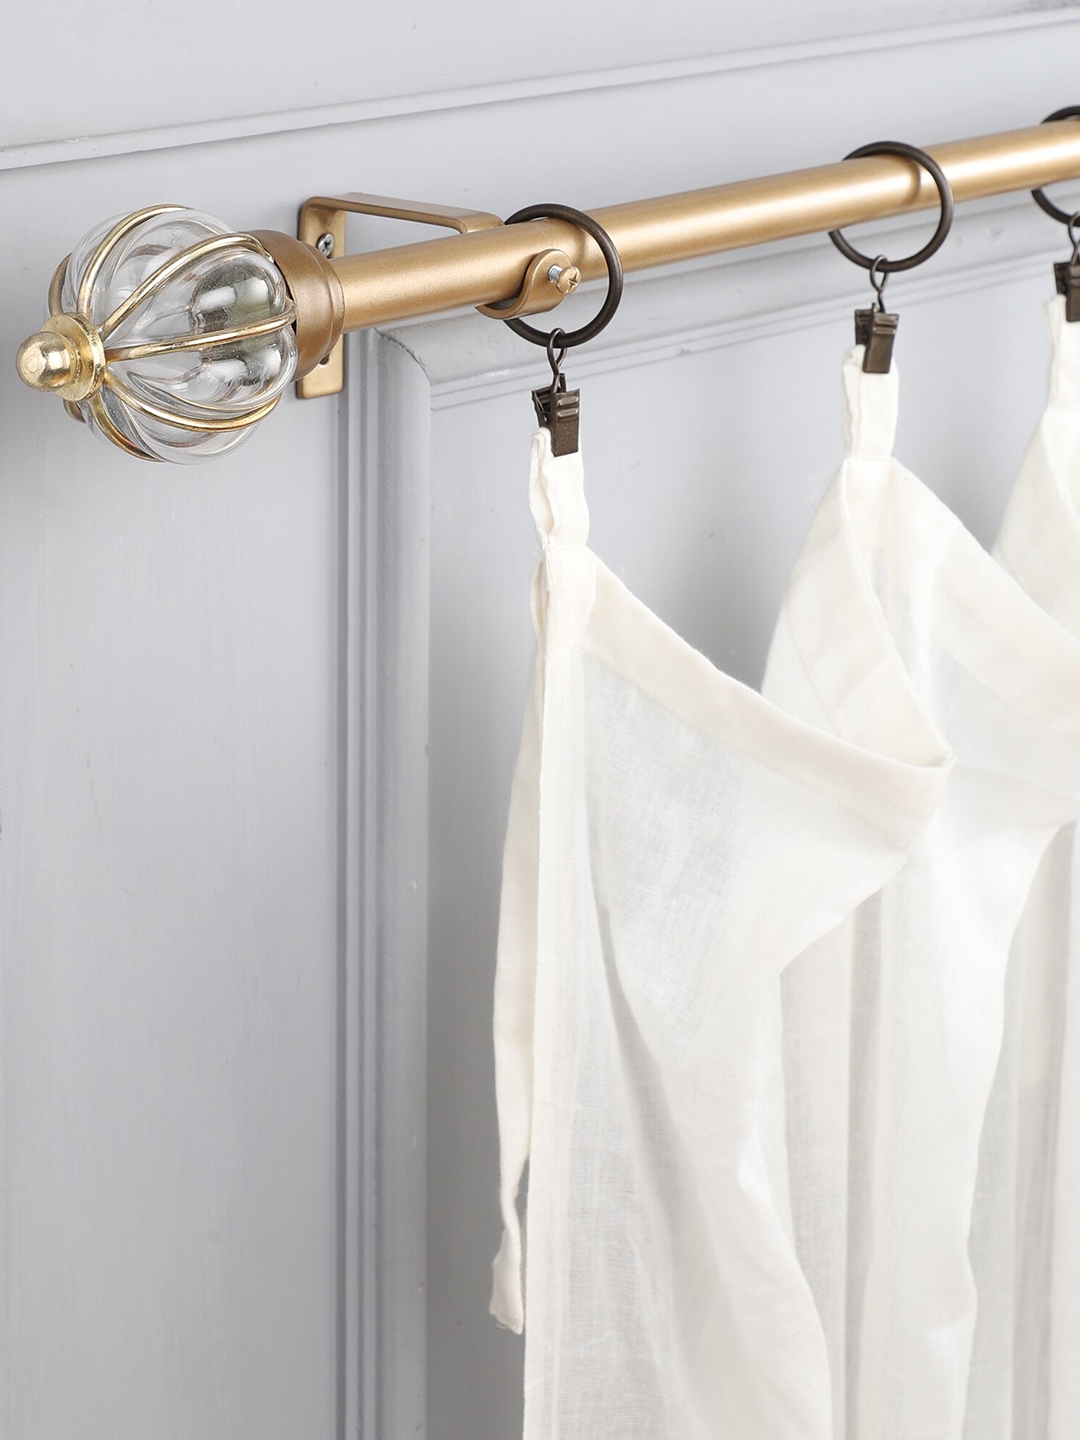 The Decor Mart Gold-Toned Extendable Curtain Rods With Brackets